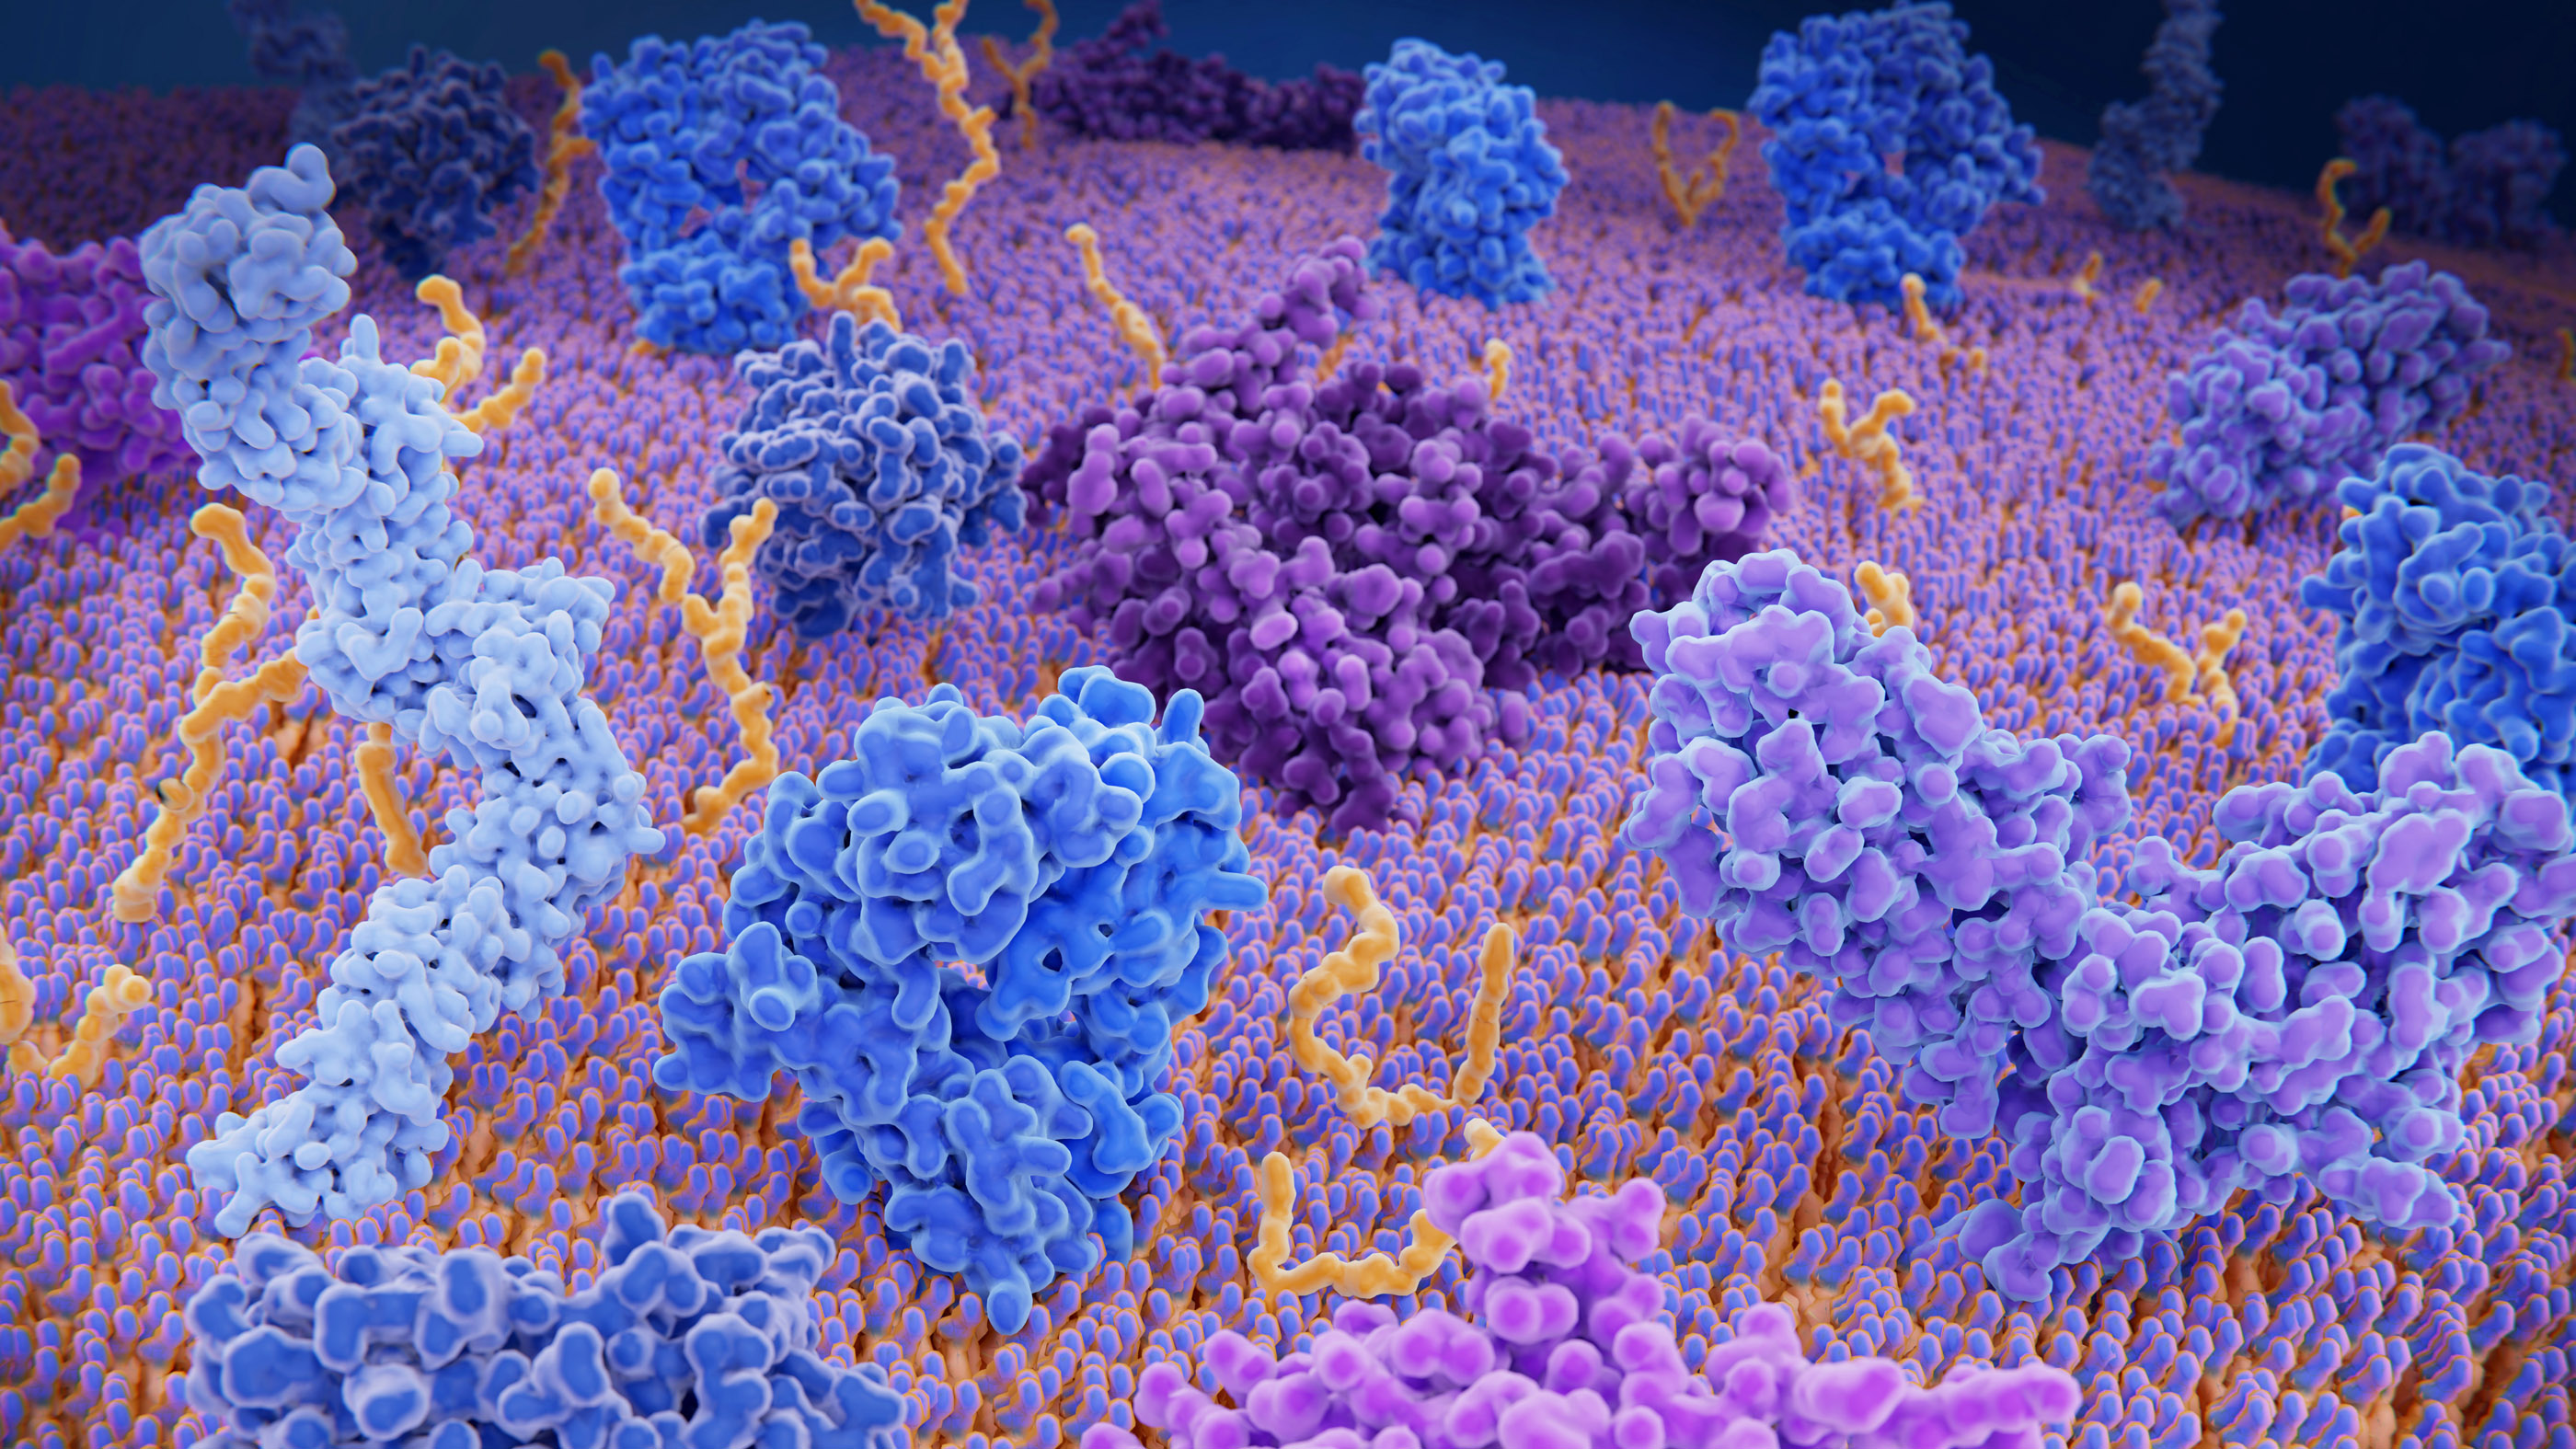 Proteins are complex structures in the body.  Here, the twisted, brightly colored spots represent different immune system proteins on the outer layer of a T cell, a type of white blood cell that helps the body identify foreign invaders.